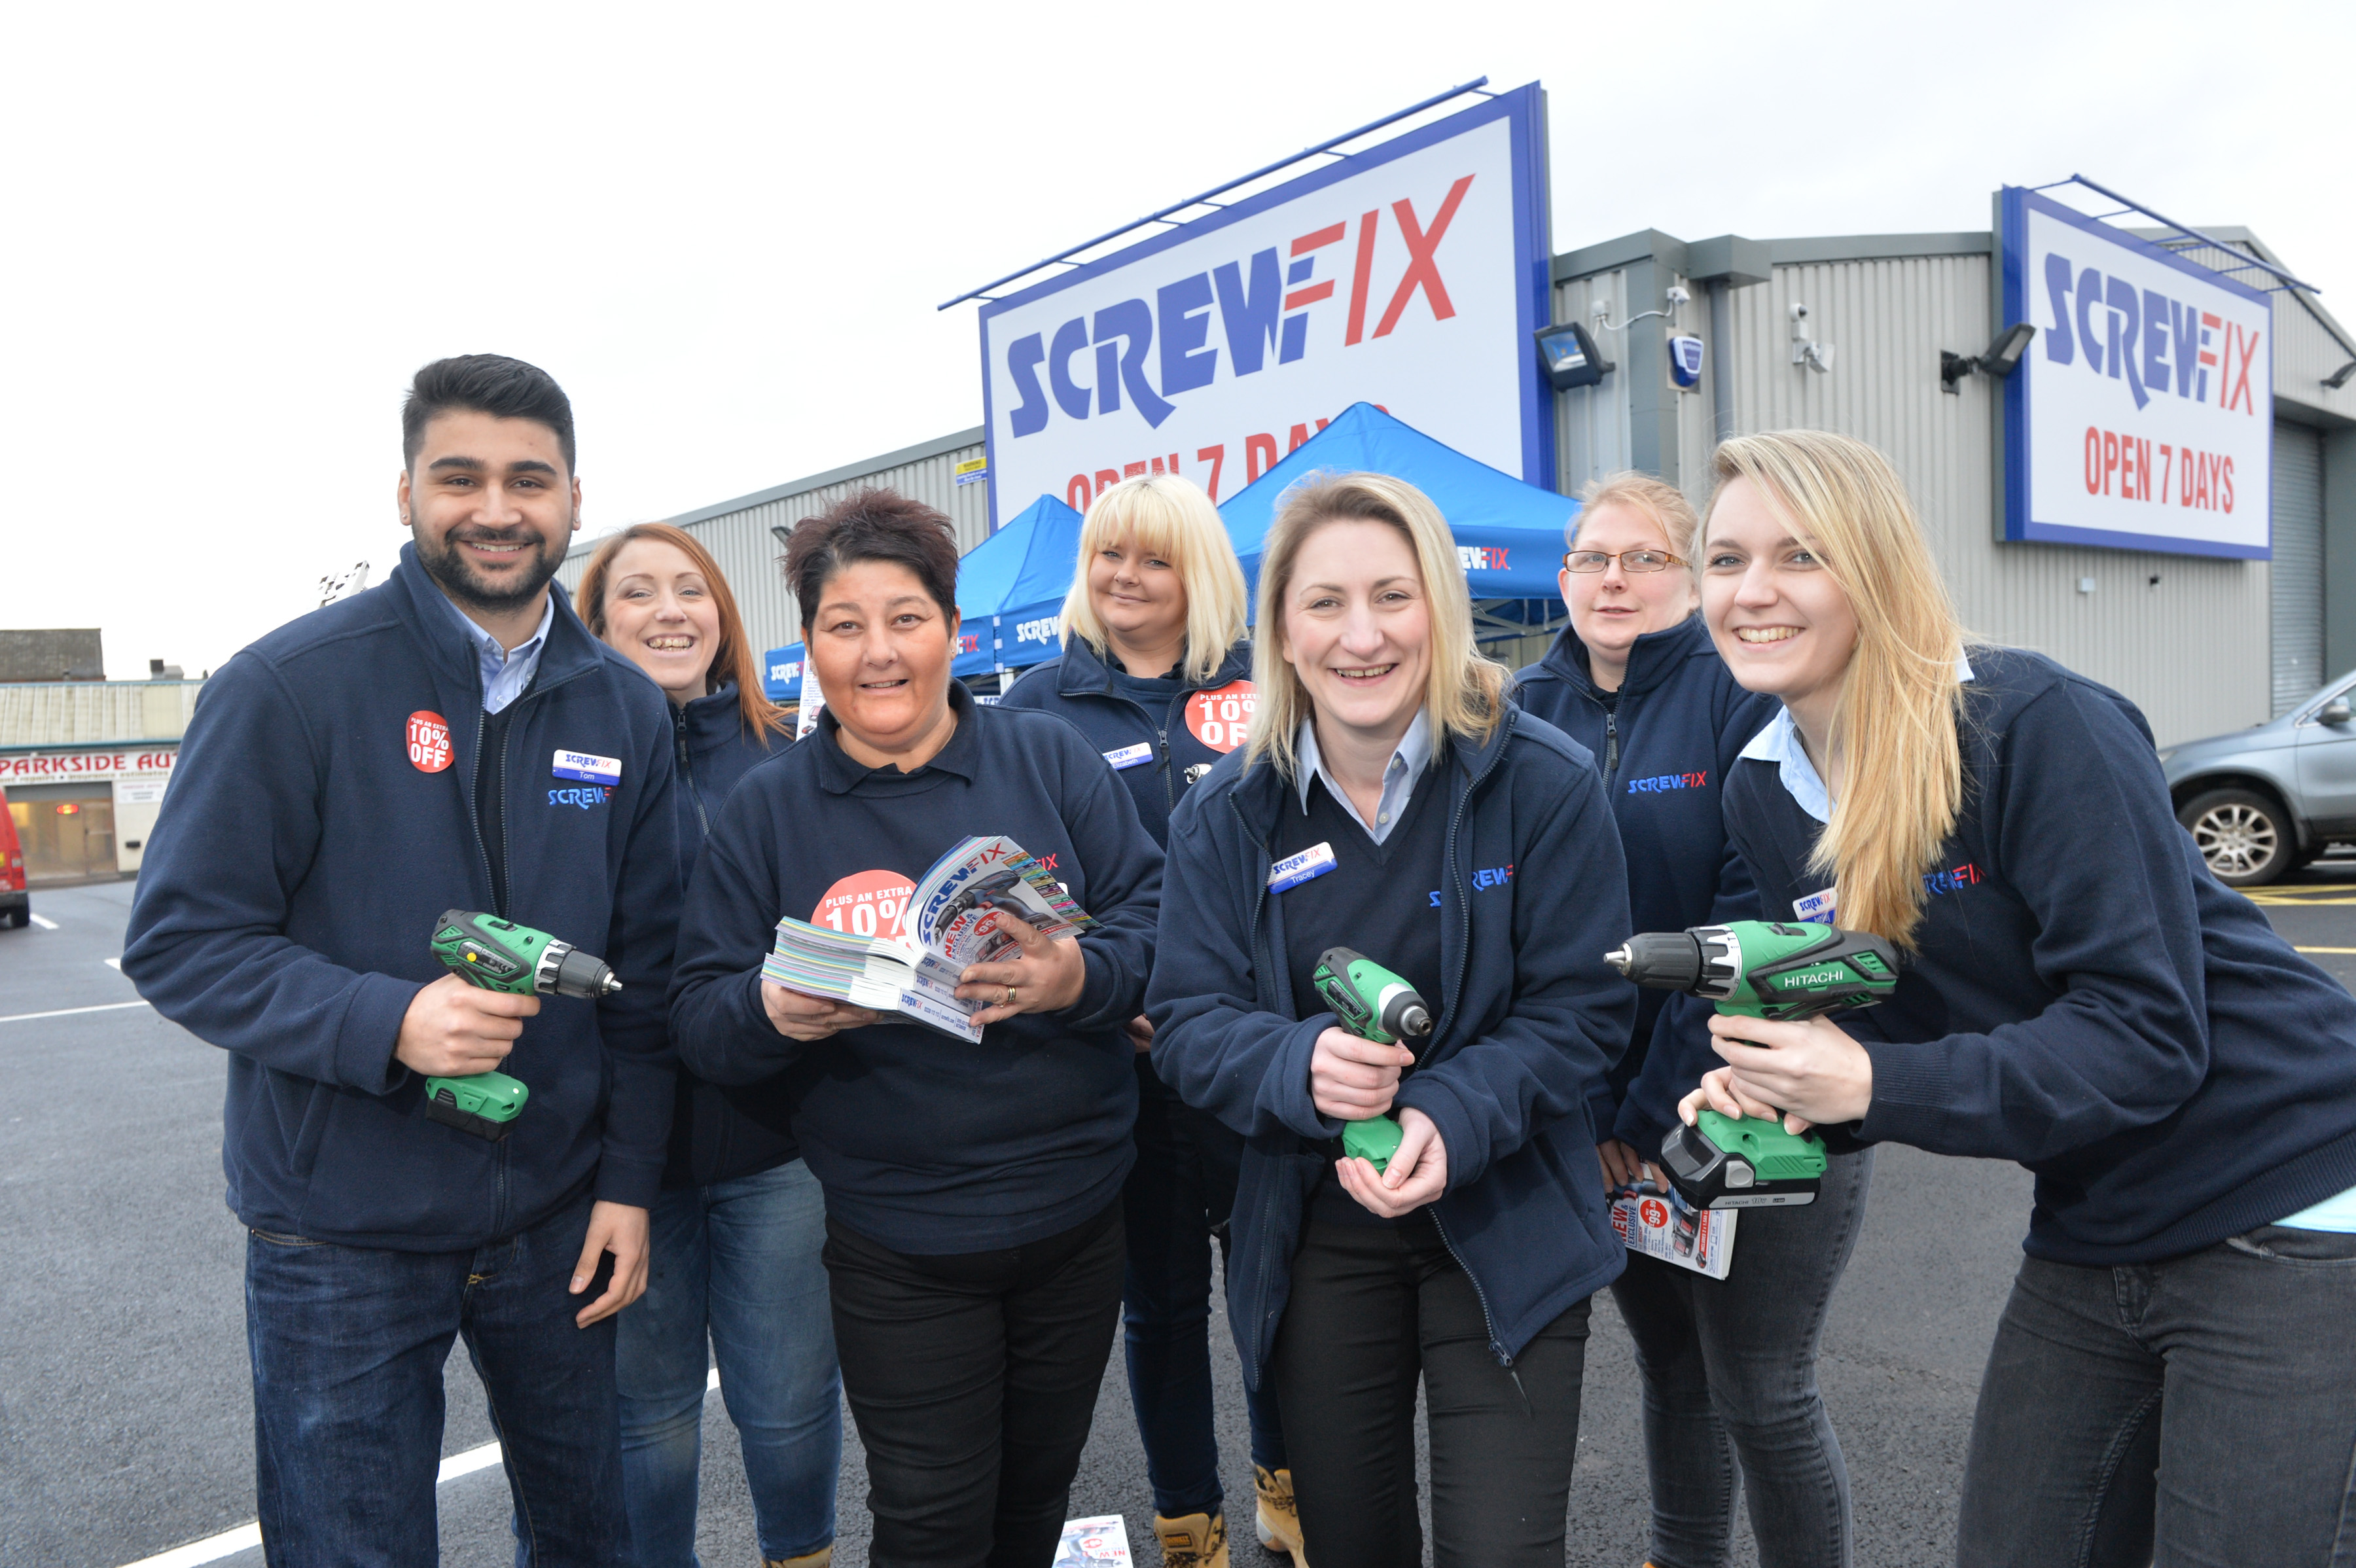 Wednesbury’s first Screwfix store is declared a runaway success